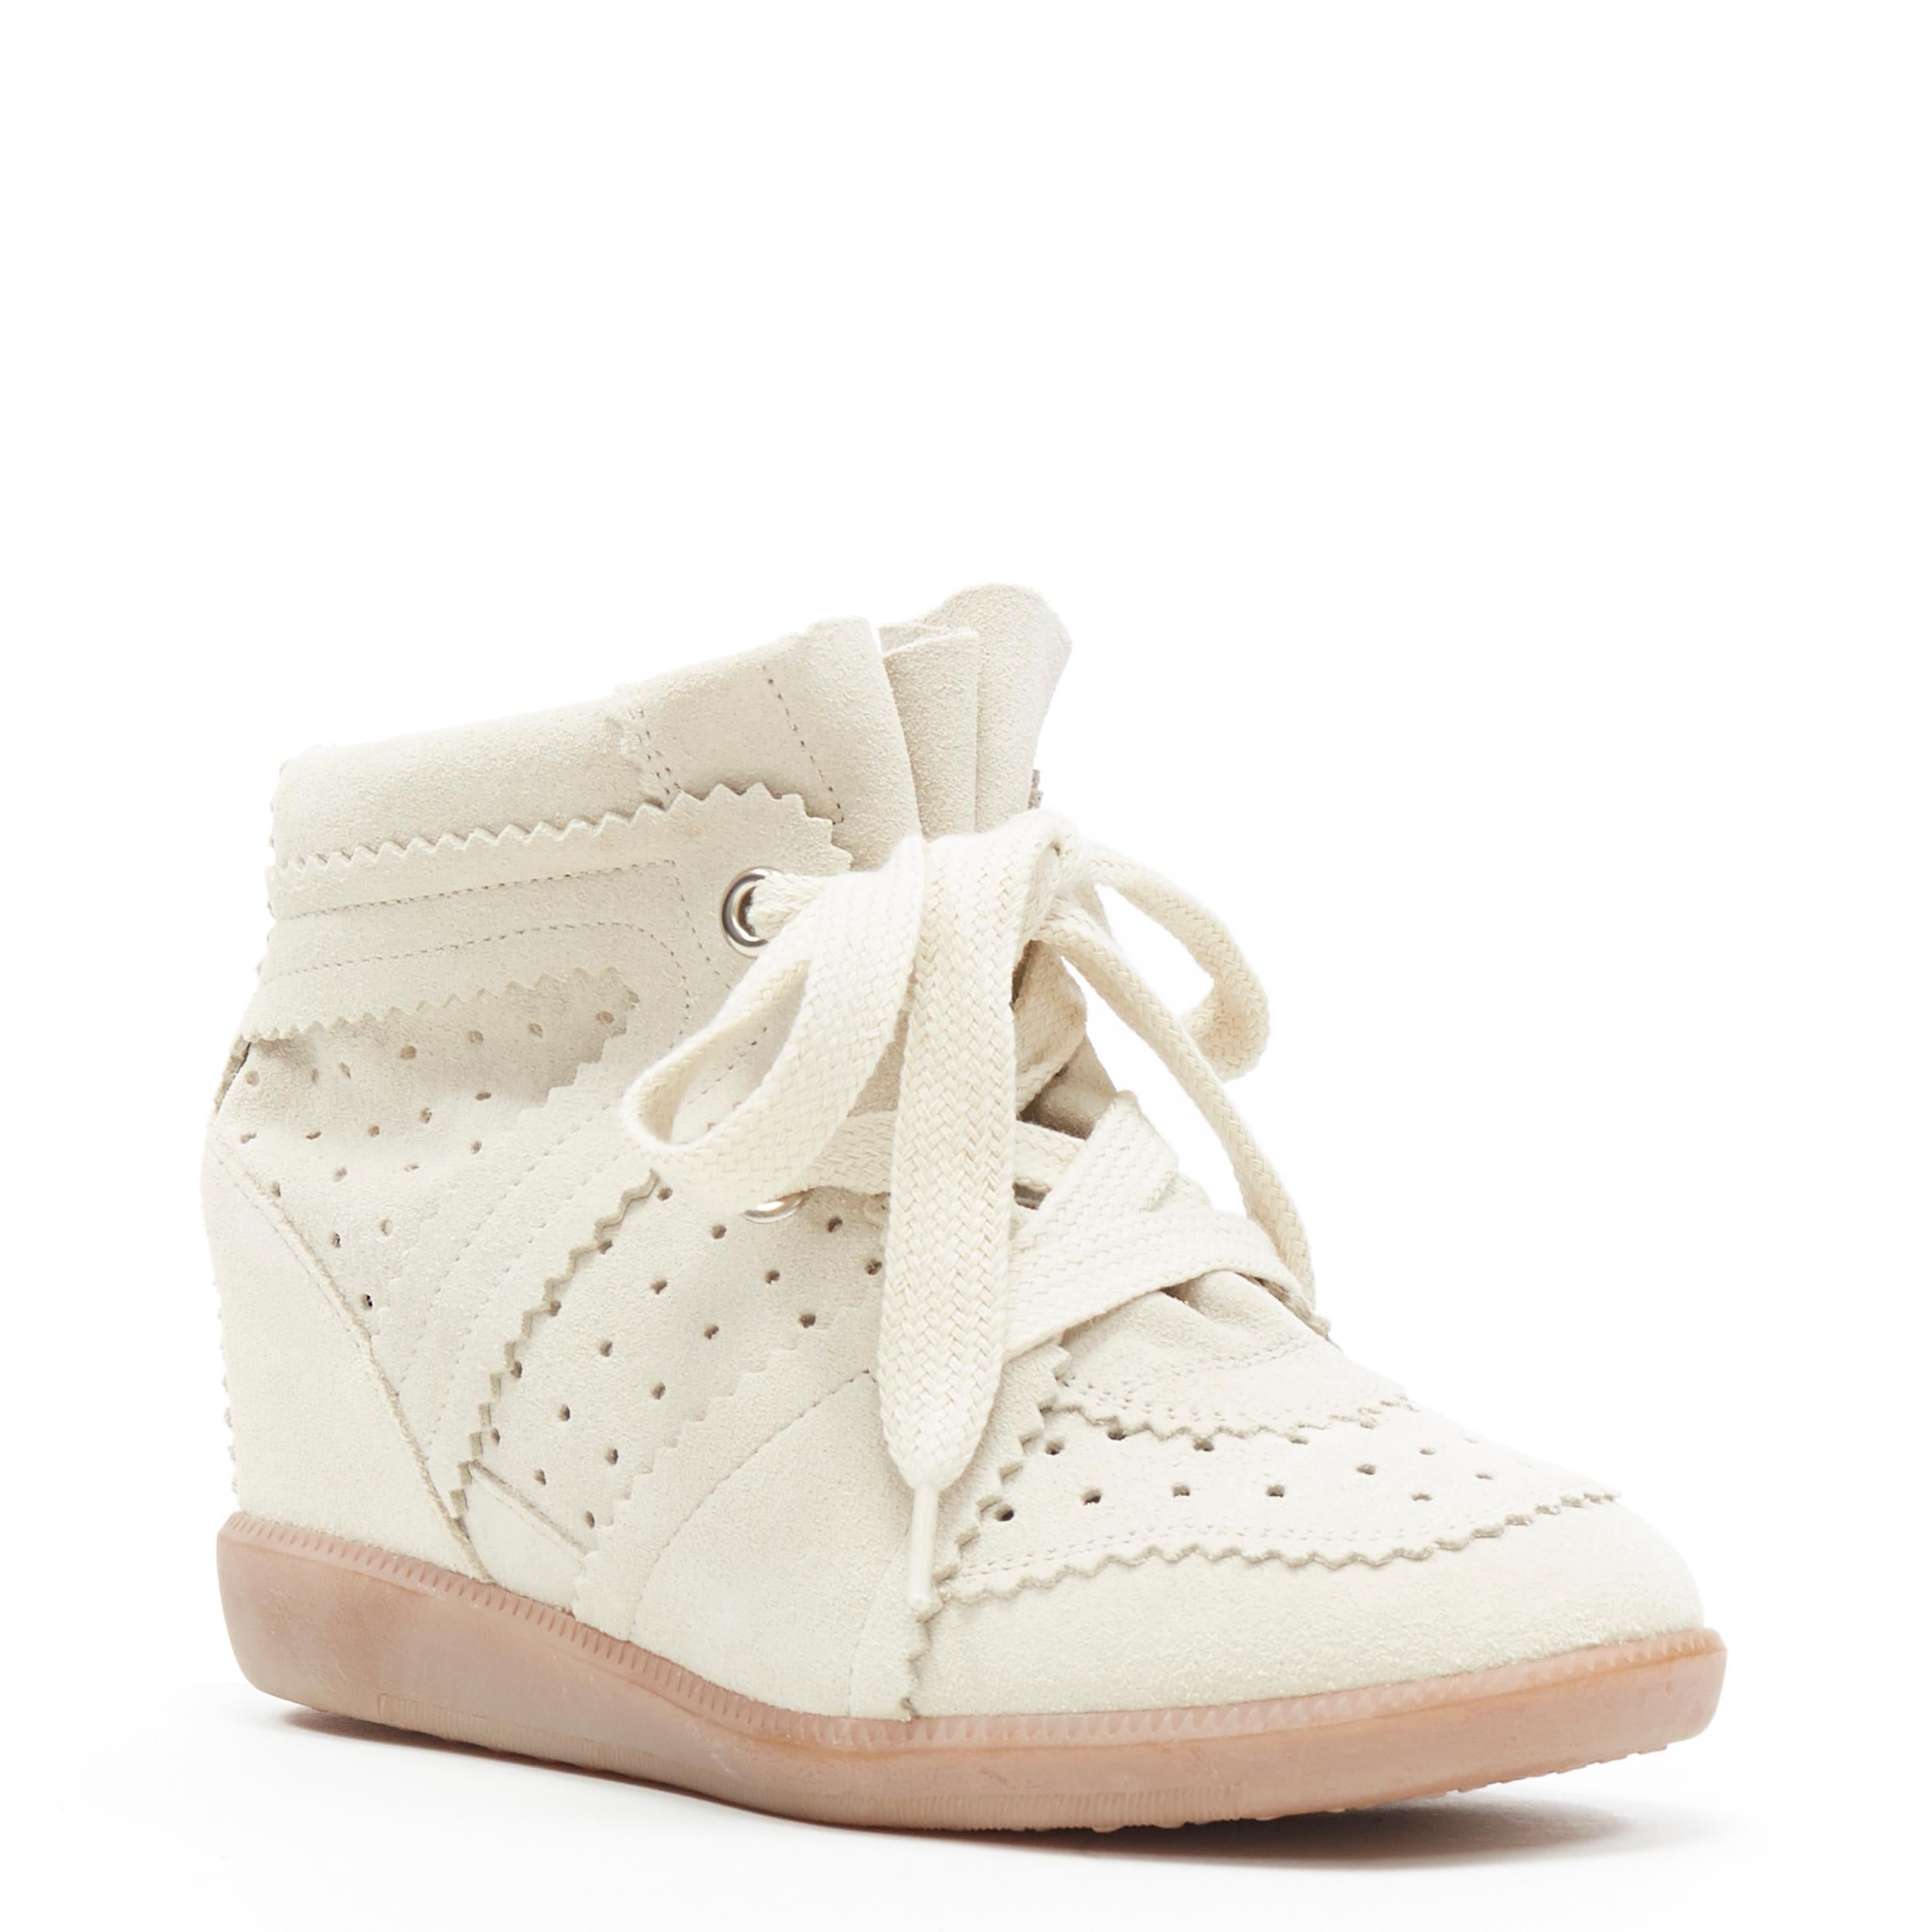 new ISABEL MARANT Bobby Chalk beige suede lace up concealed wedge sneaker EU37
Brand: Isabel Marant Etoile
Designer: Isabel Marant
Model Name / Style: Bobby
Material: Suede
Color: Beige
Pattern: Solid
Closure: Lace up
Lining material: Leather
Extra